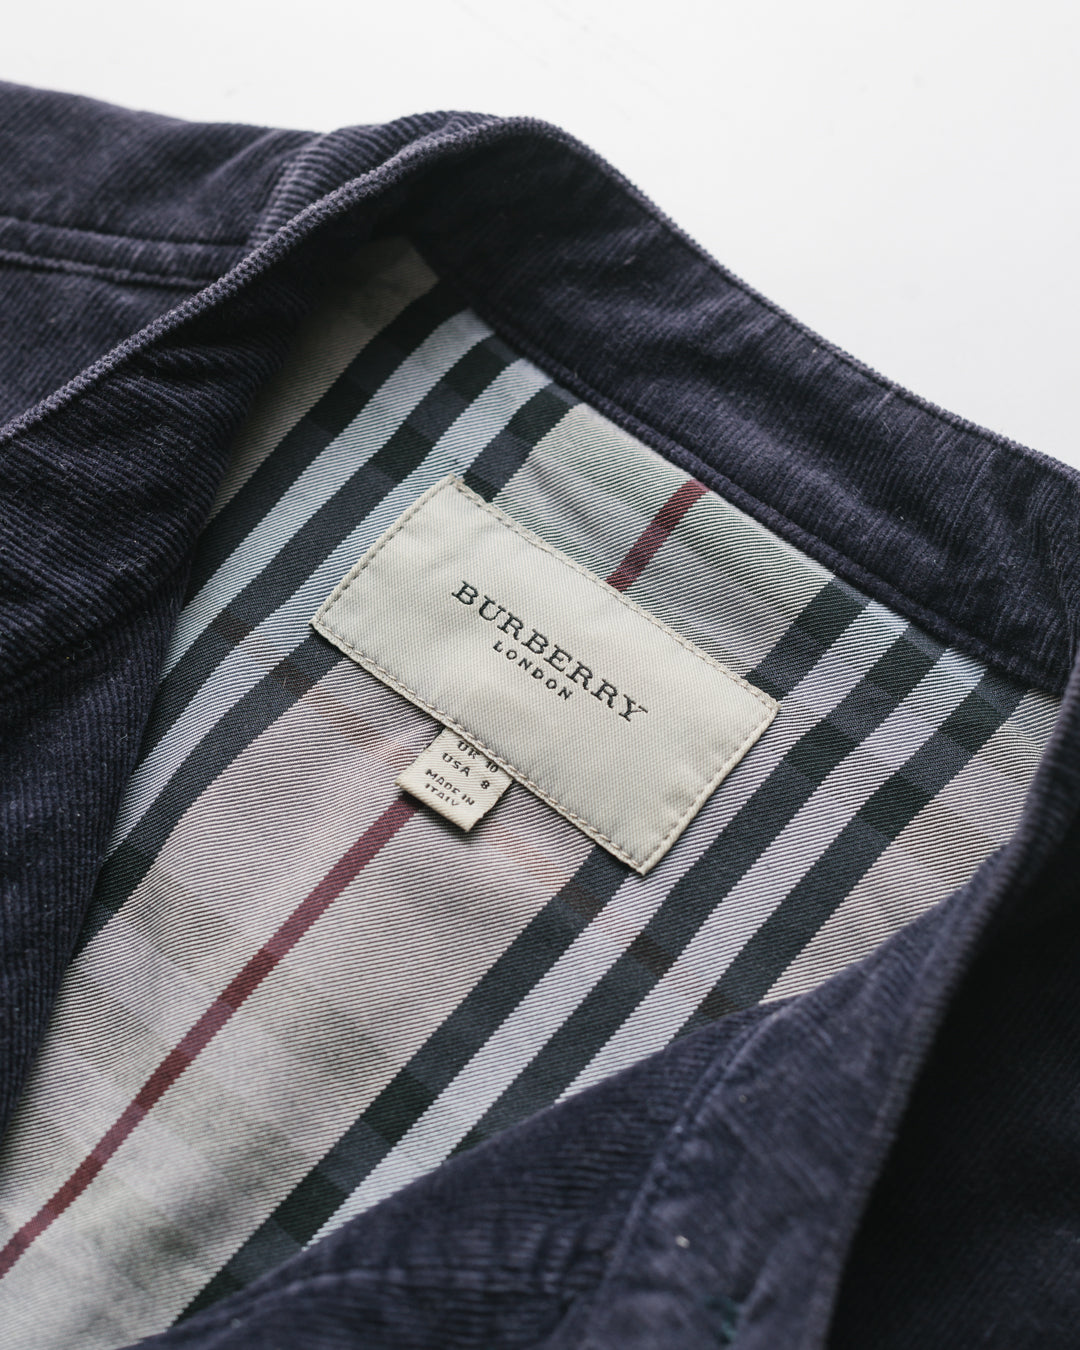 Burberry structured corduroy jacket